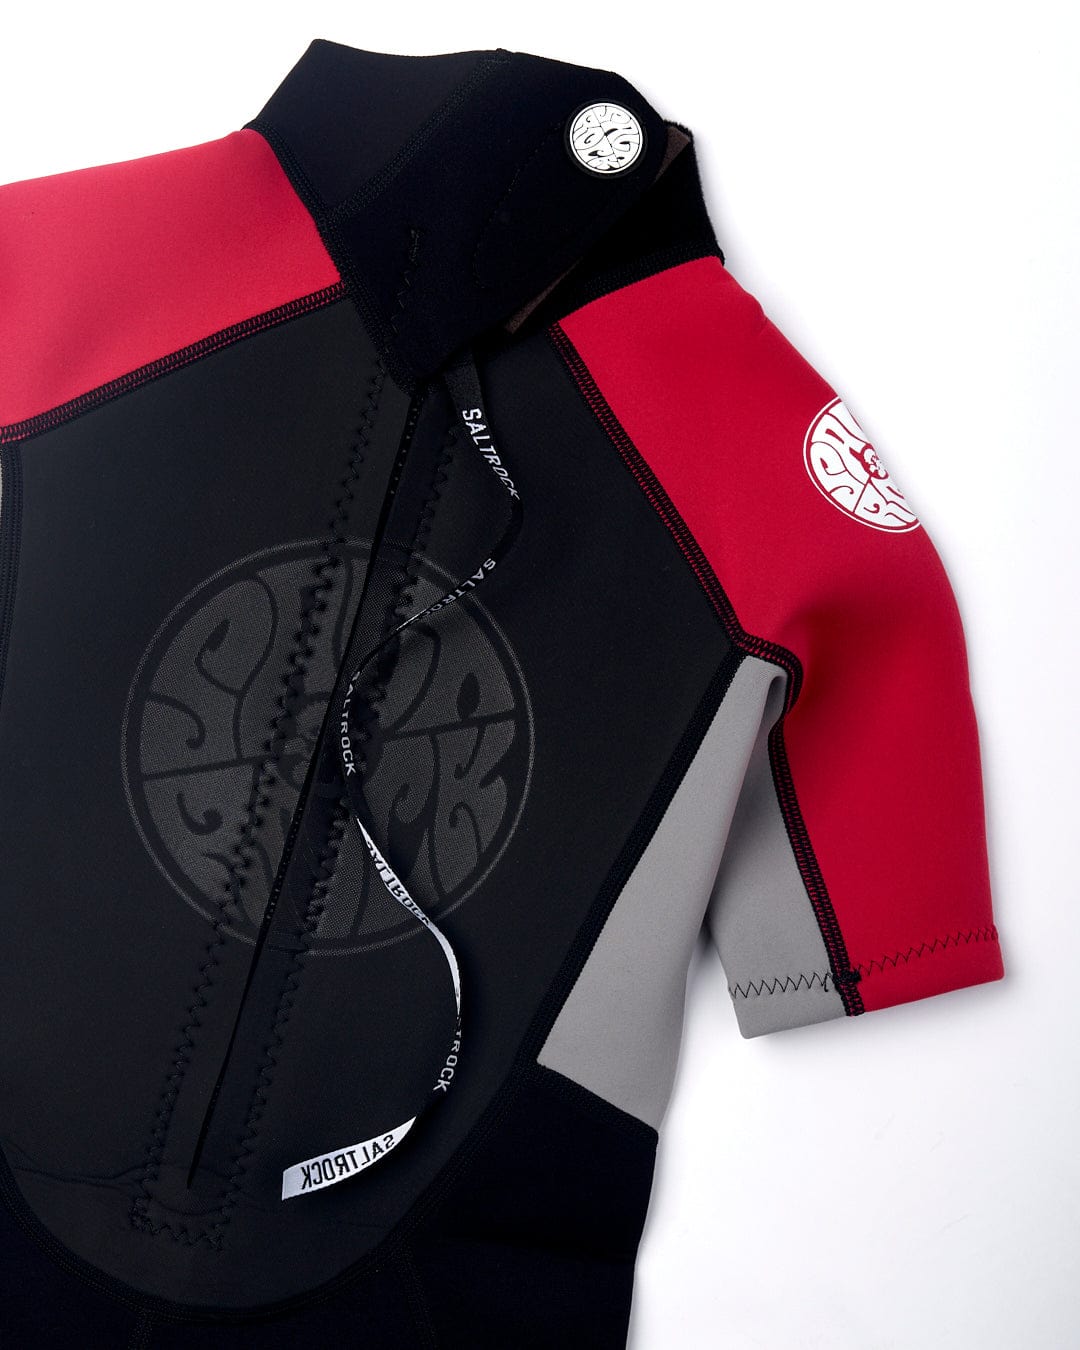 A red and black neoprene wetsuit with a YKK zippered front and logo patches on the shoulders laid flat on a white background. - Saltrock Core - Boys 3/2 Shortie Wetsuit - Black/Red